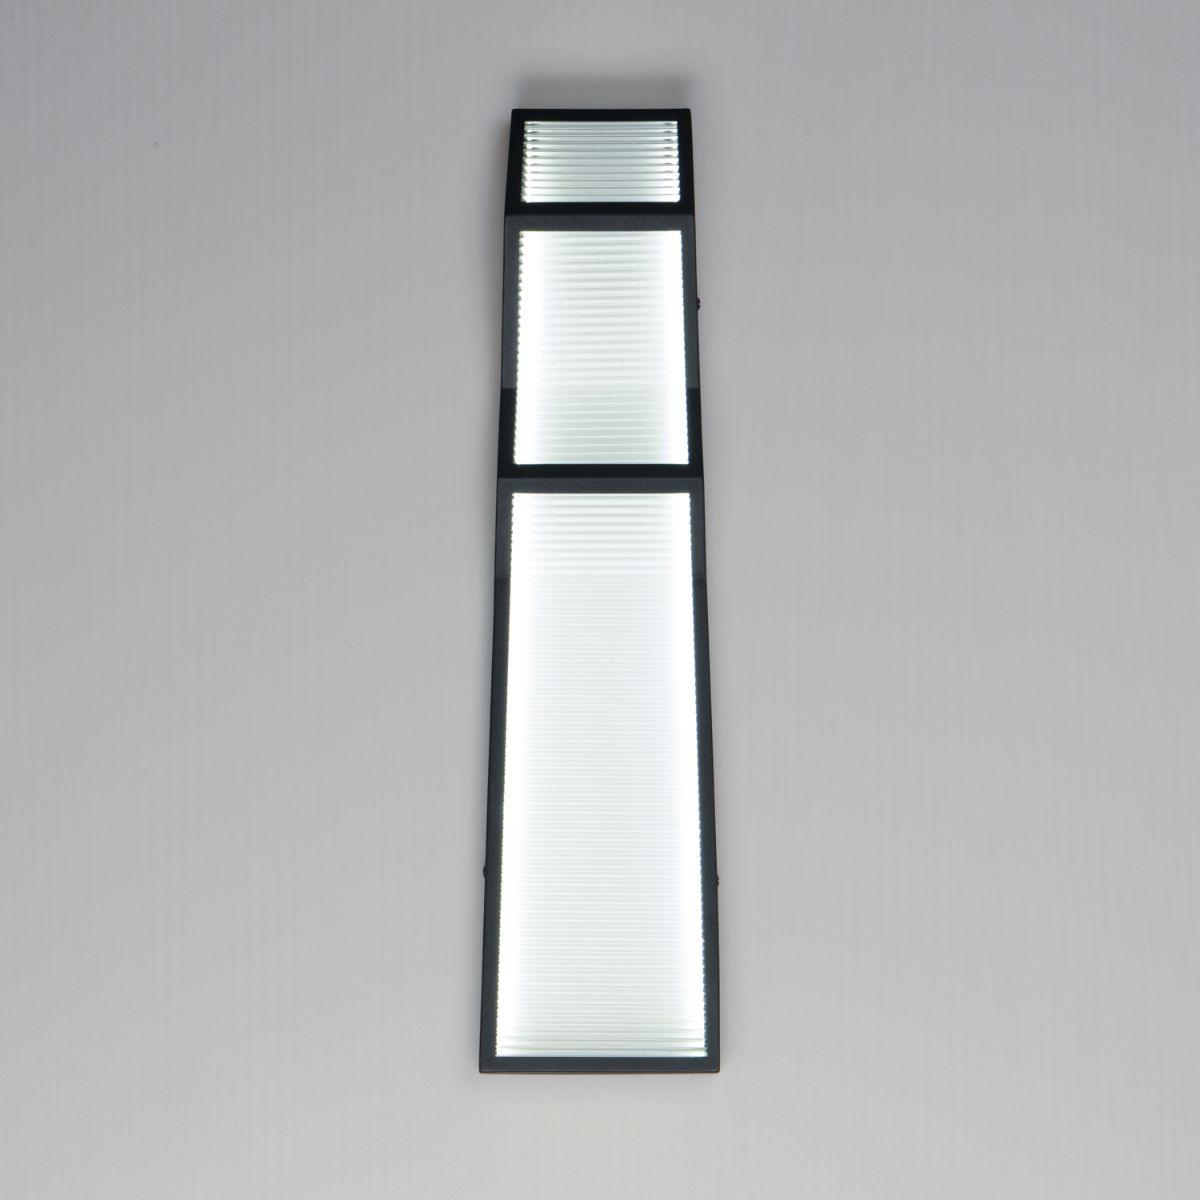 Totem 24 in. LED Outdoor Wall Sconce 3000K Black Finish